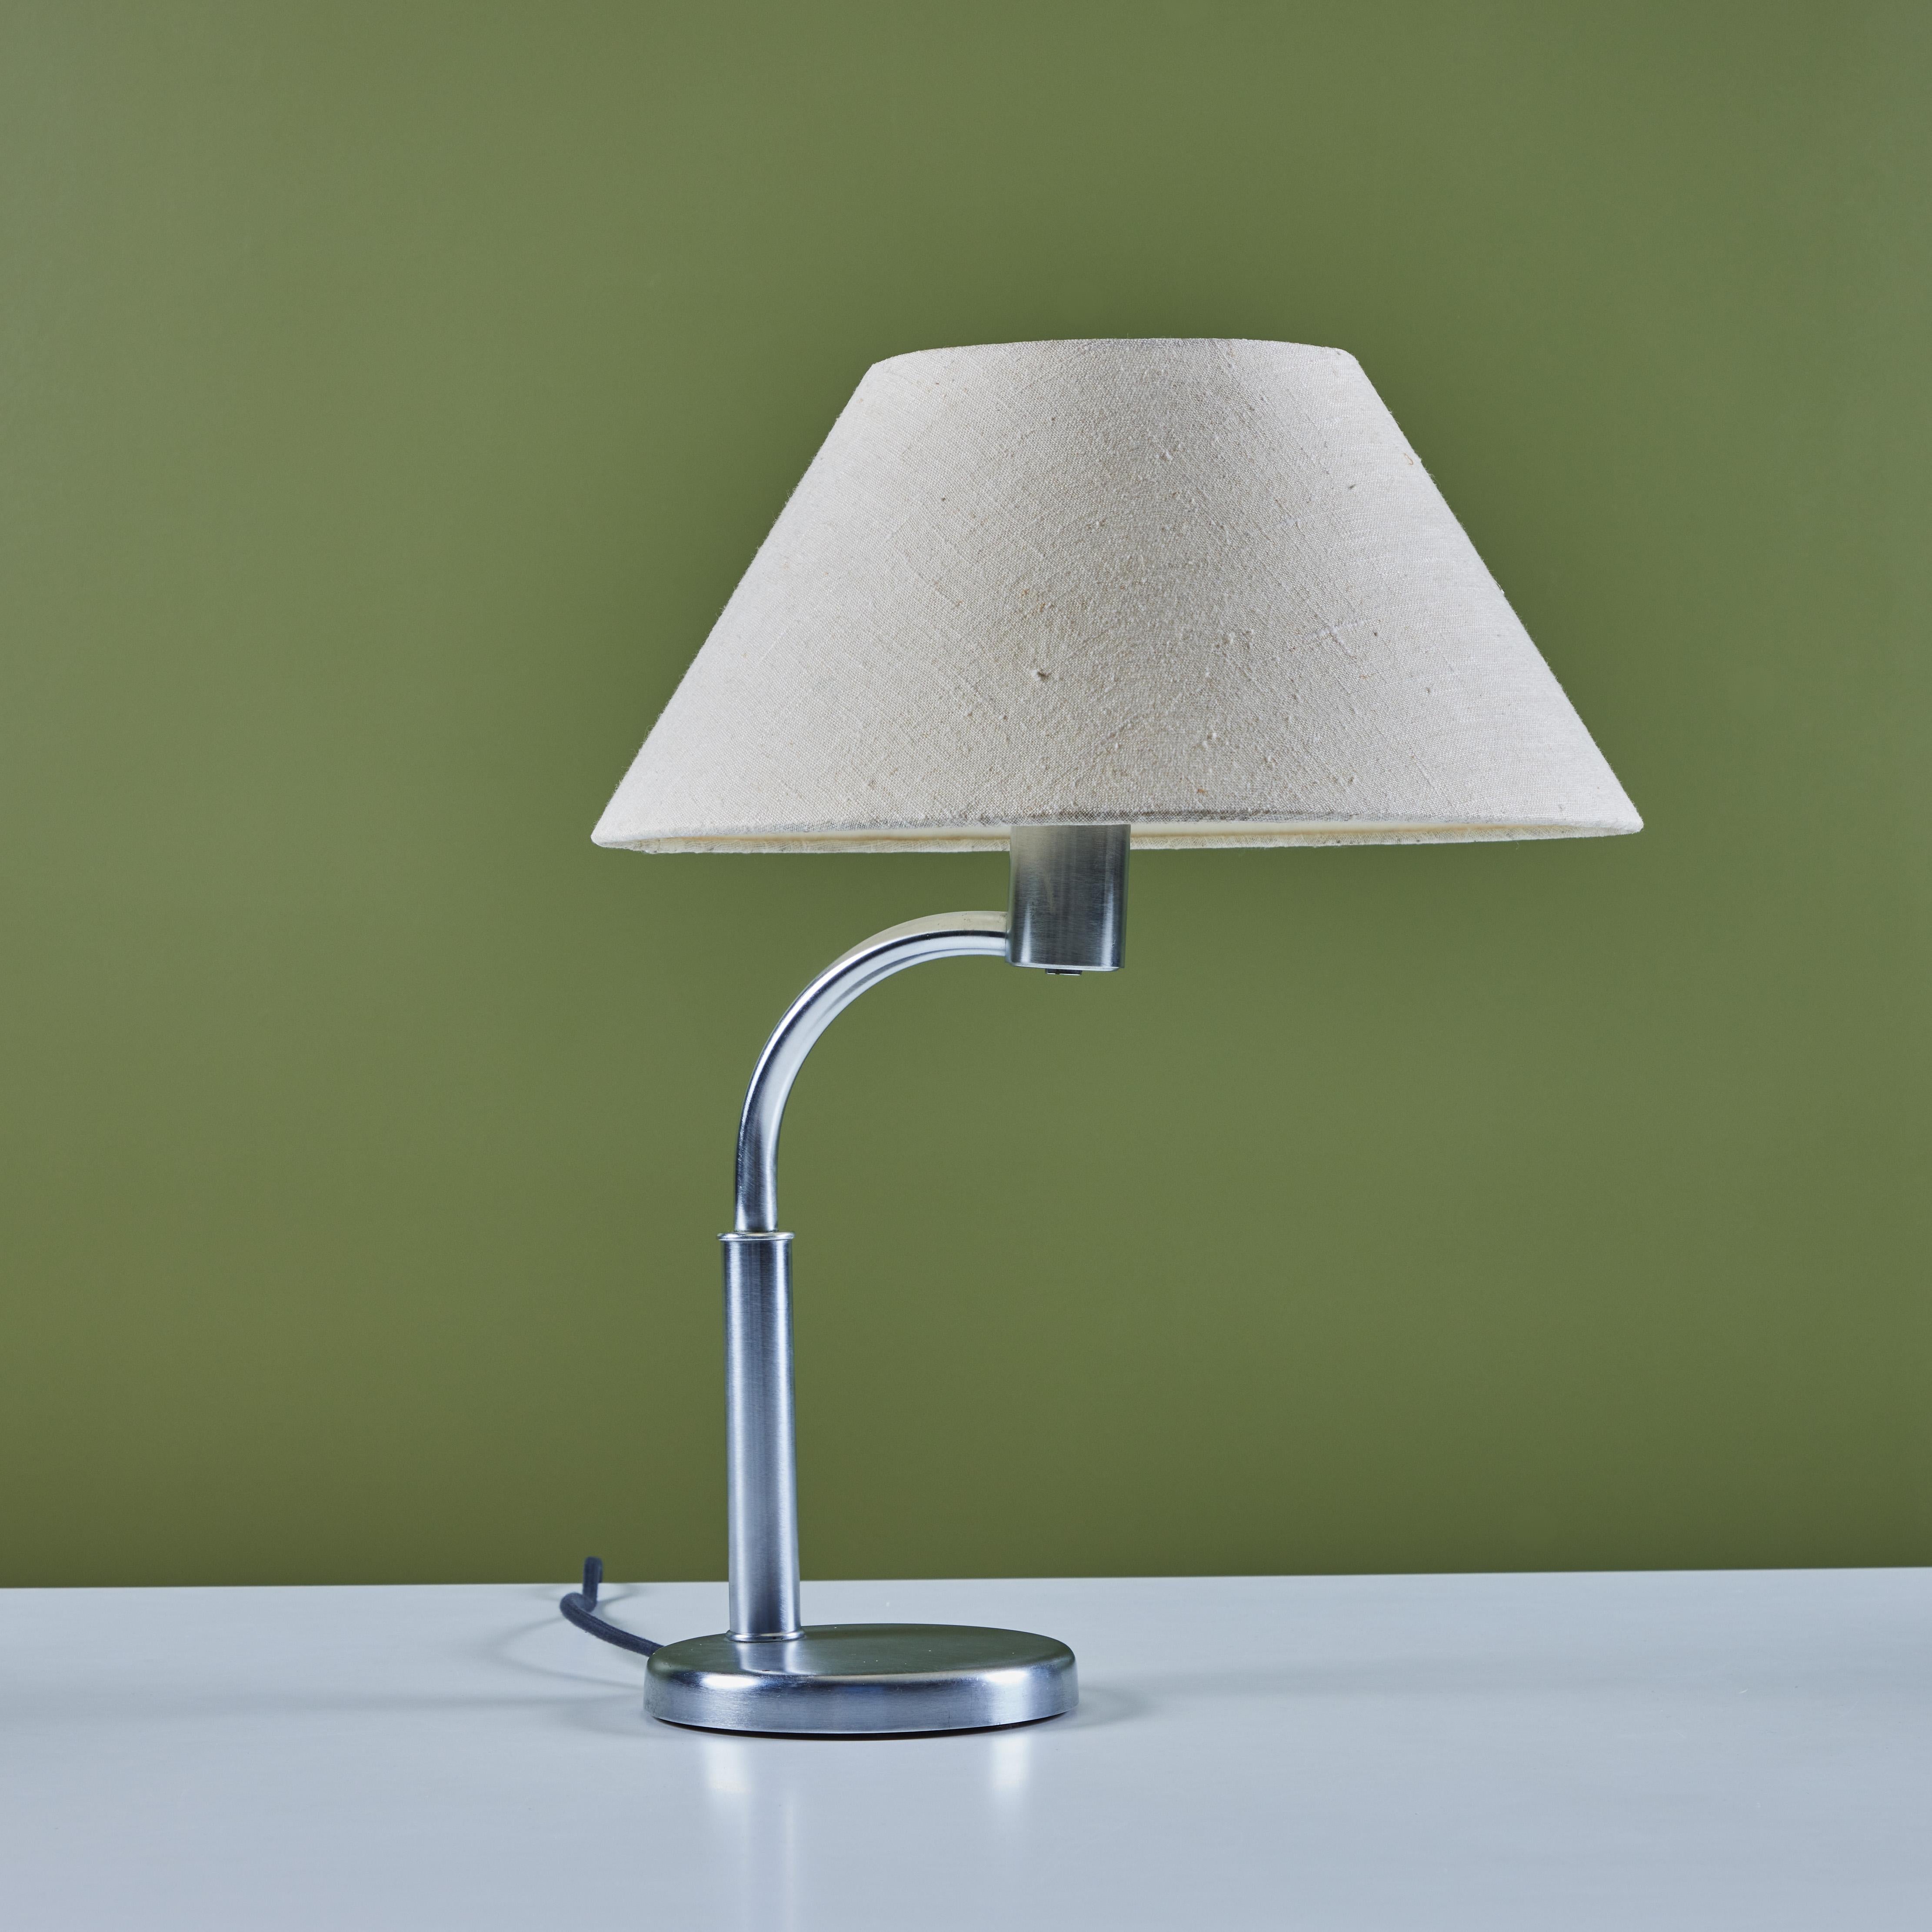 Walter von Nessen aluminum table lamp for Nessen Studio, c.1960s, USA. The table lamp features a curved aluminum stem and stainless steel base with original linen shade.

Dimensions
14